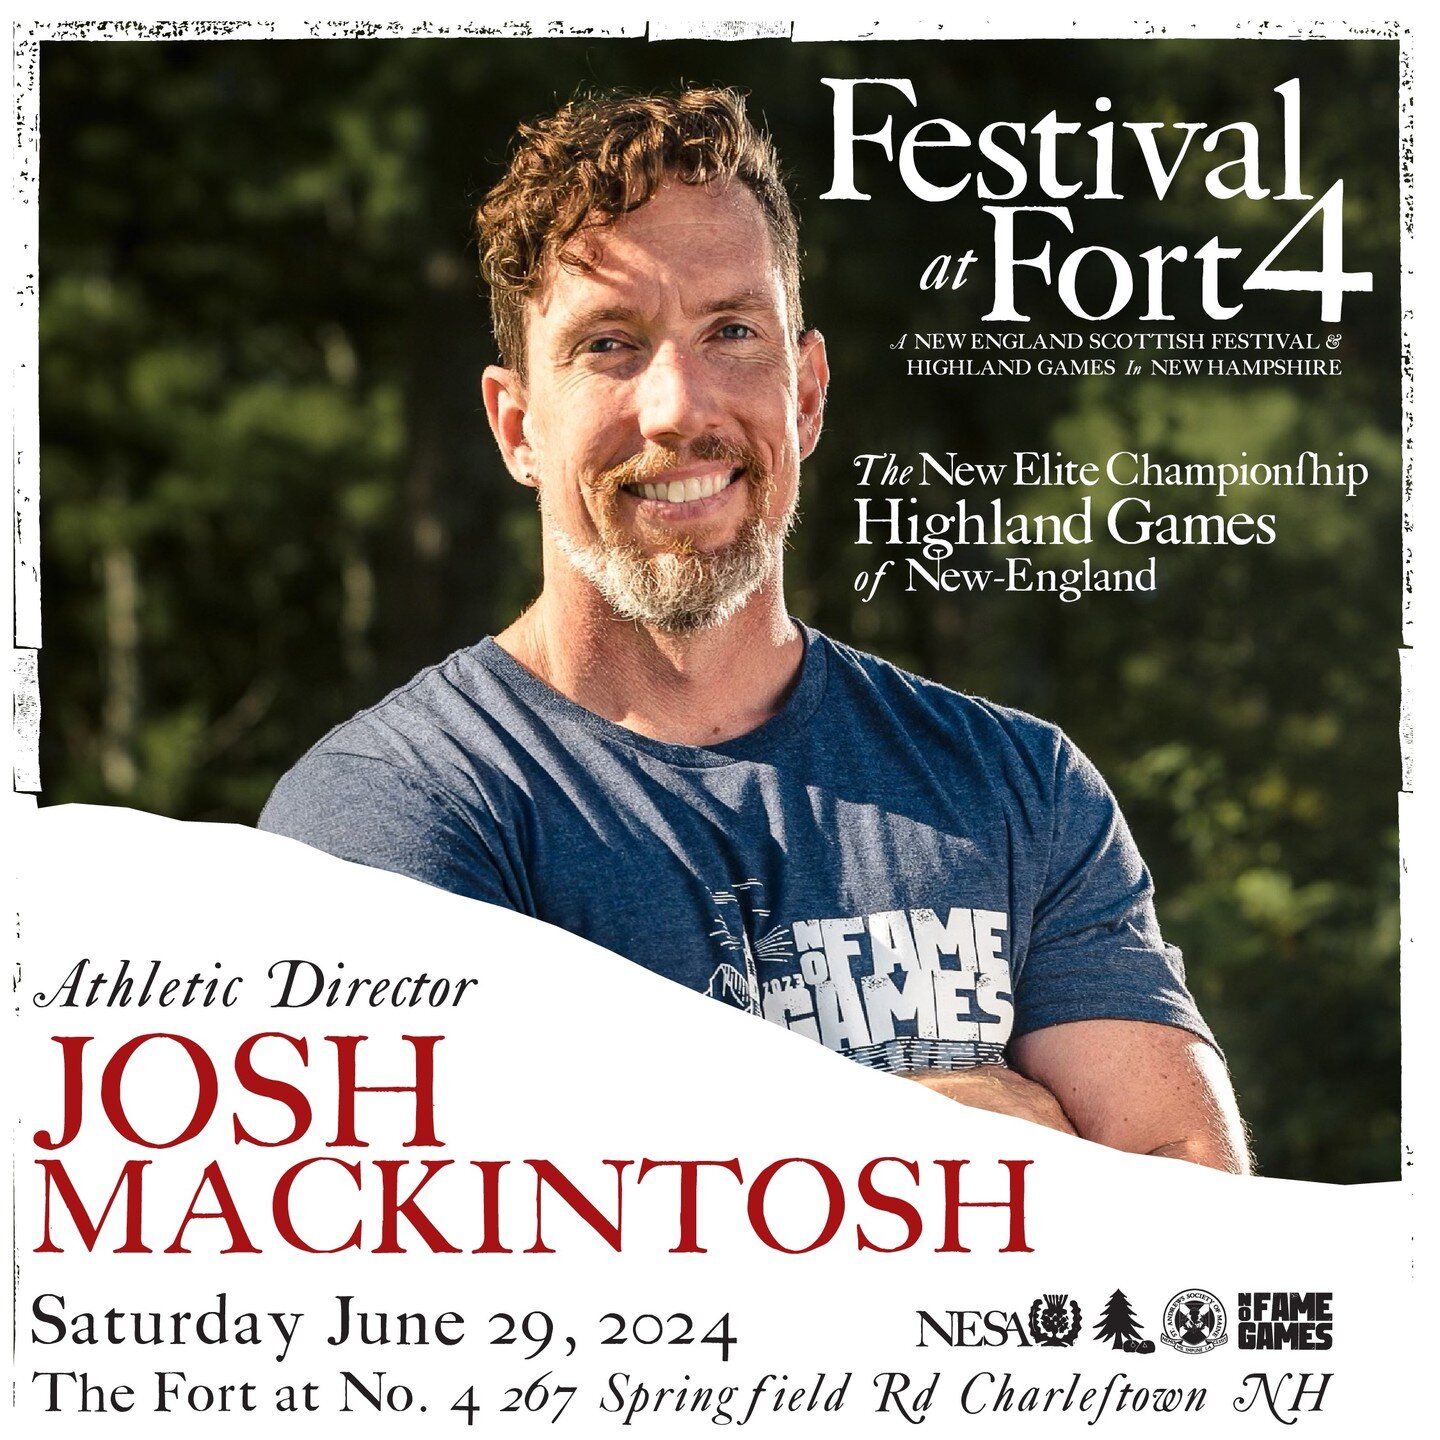 On the Amateur Highland Games side, No Fame Games' own Josh Mackintosh will be Athletic Directing. The New Elite Championship Highland Games of New England at The Festival At Fort 4!
Saturday June 29,2024.
Get your tickets today!
#highlandgames #fest